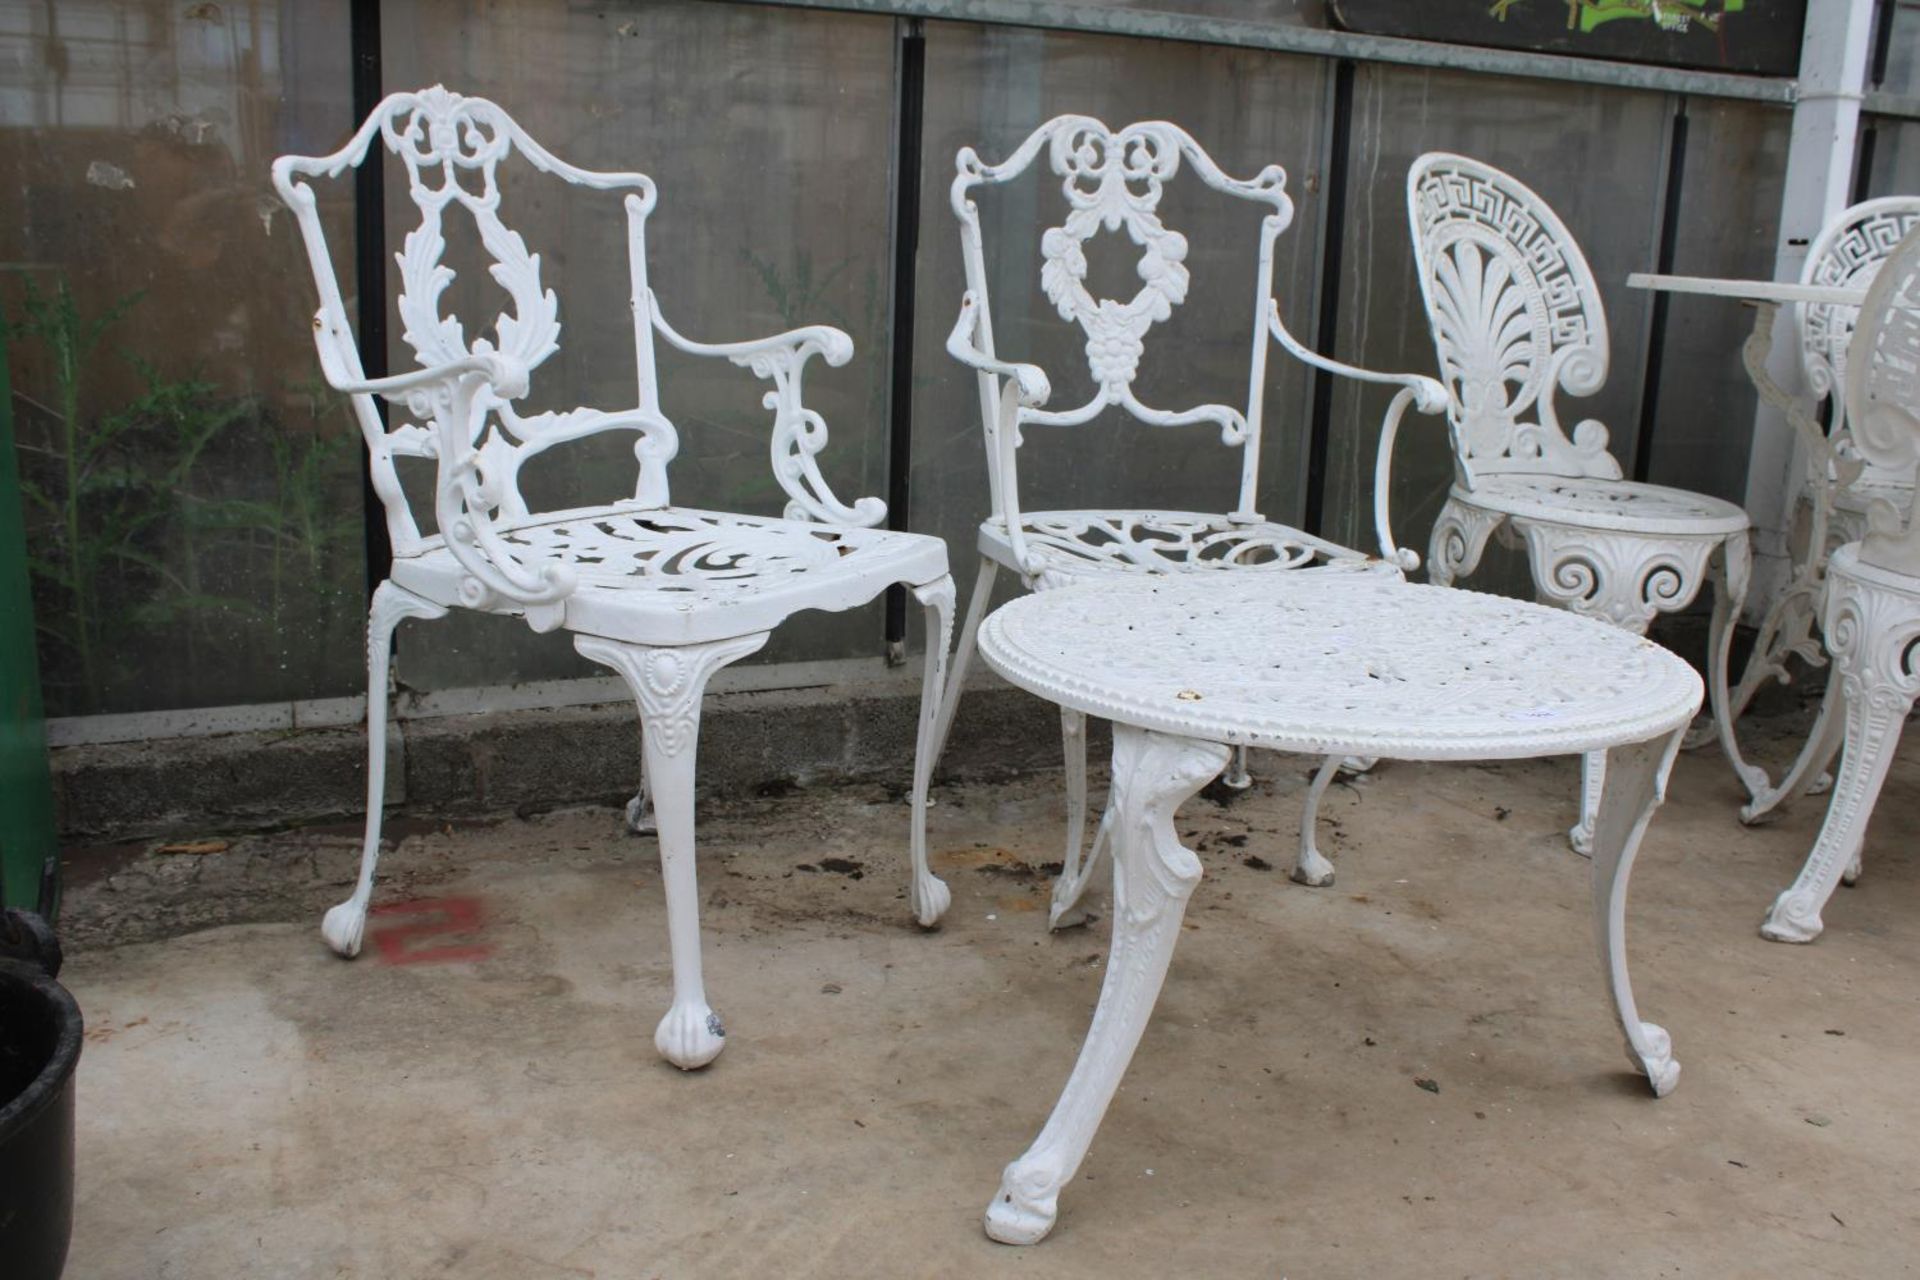 A VINTAGE CAST ALLOY BISTRO SET COMPRISING OF A ROUND TABLE AND FOUR CHAIRS - Image 6 of 6